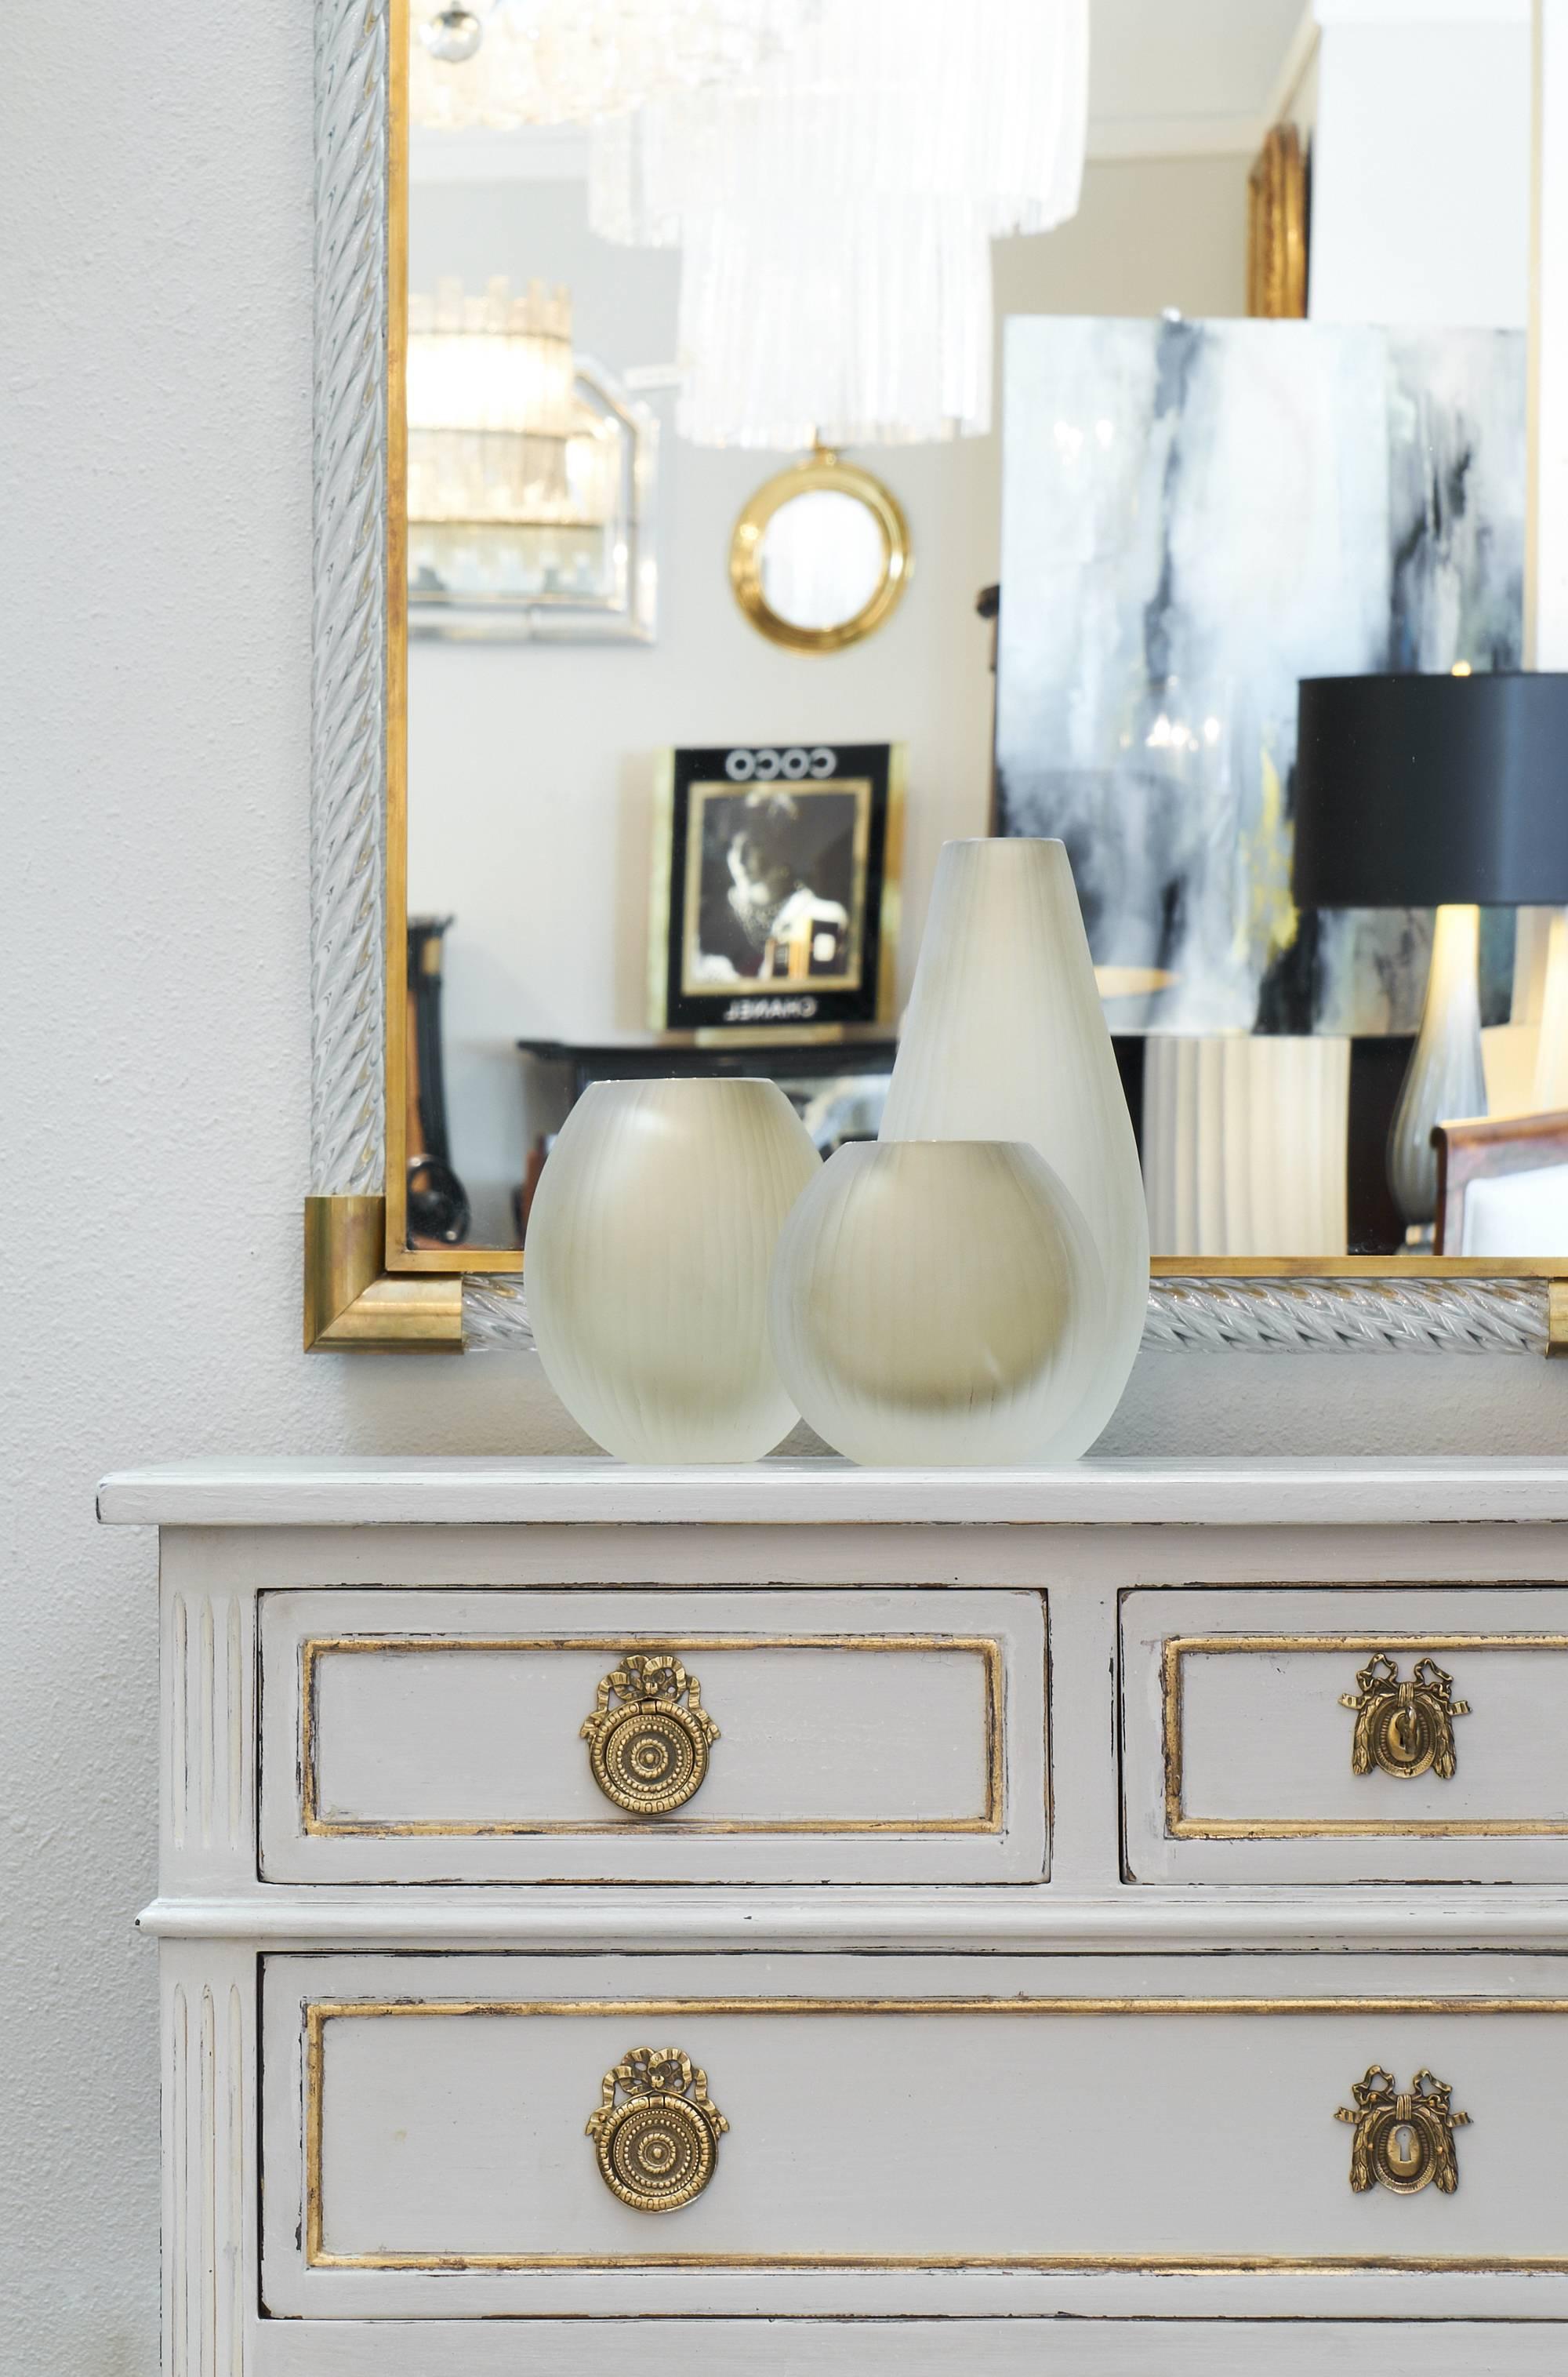 Finished with gold leafed accents on the trims, this hand-painted Directoire chest of drawers is of fantastic quality! The grey "trianon" color is beautiful, and contrasts wonderfully with the finely cast gilt bronze hardware. This piece